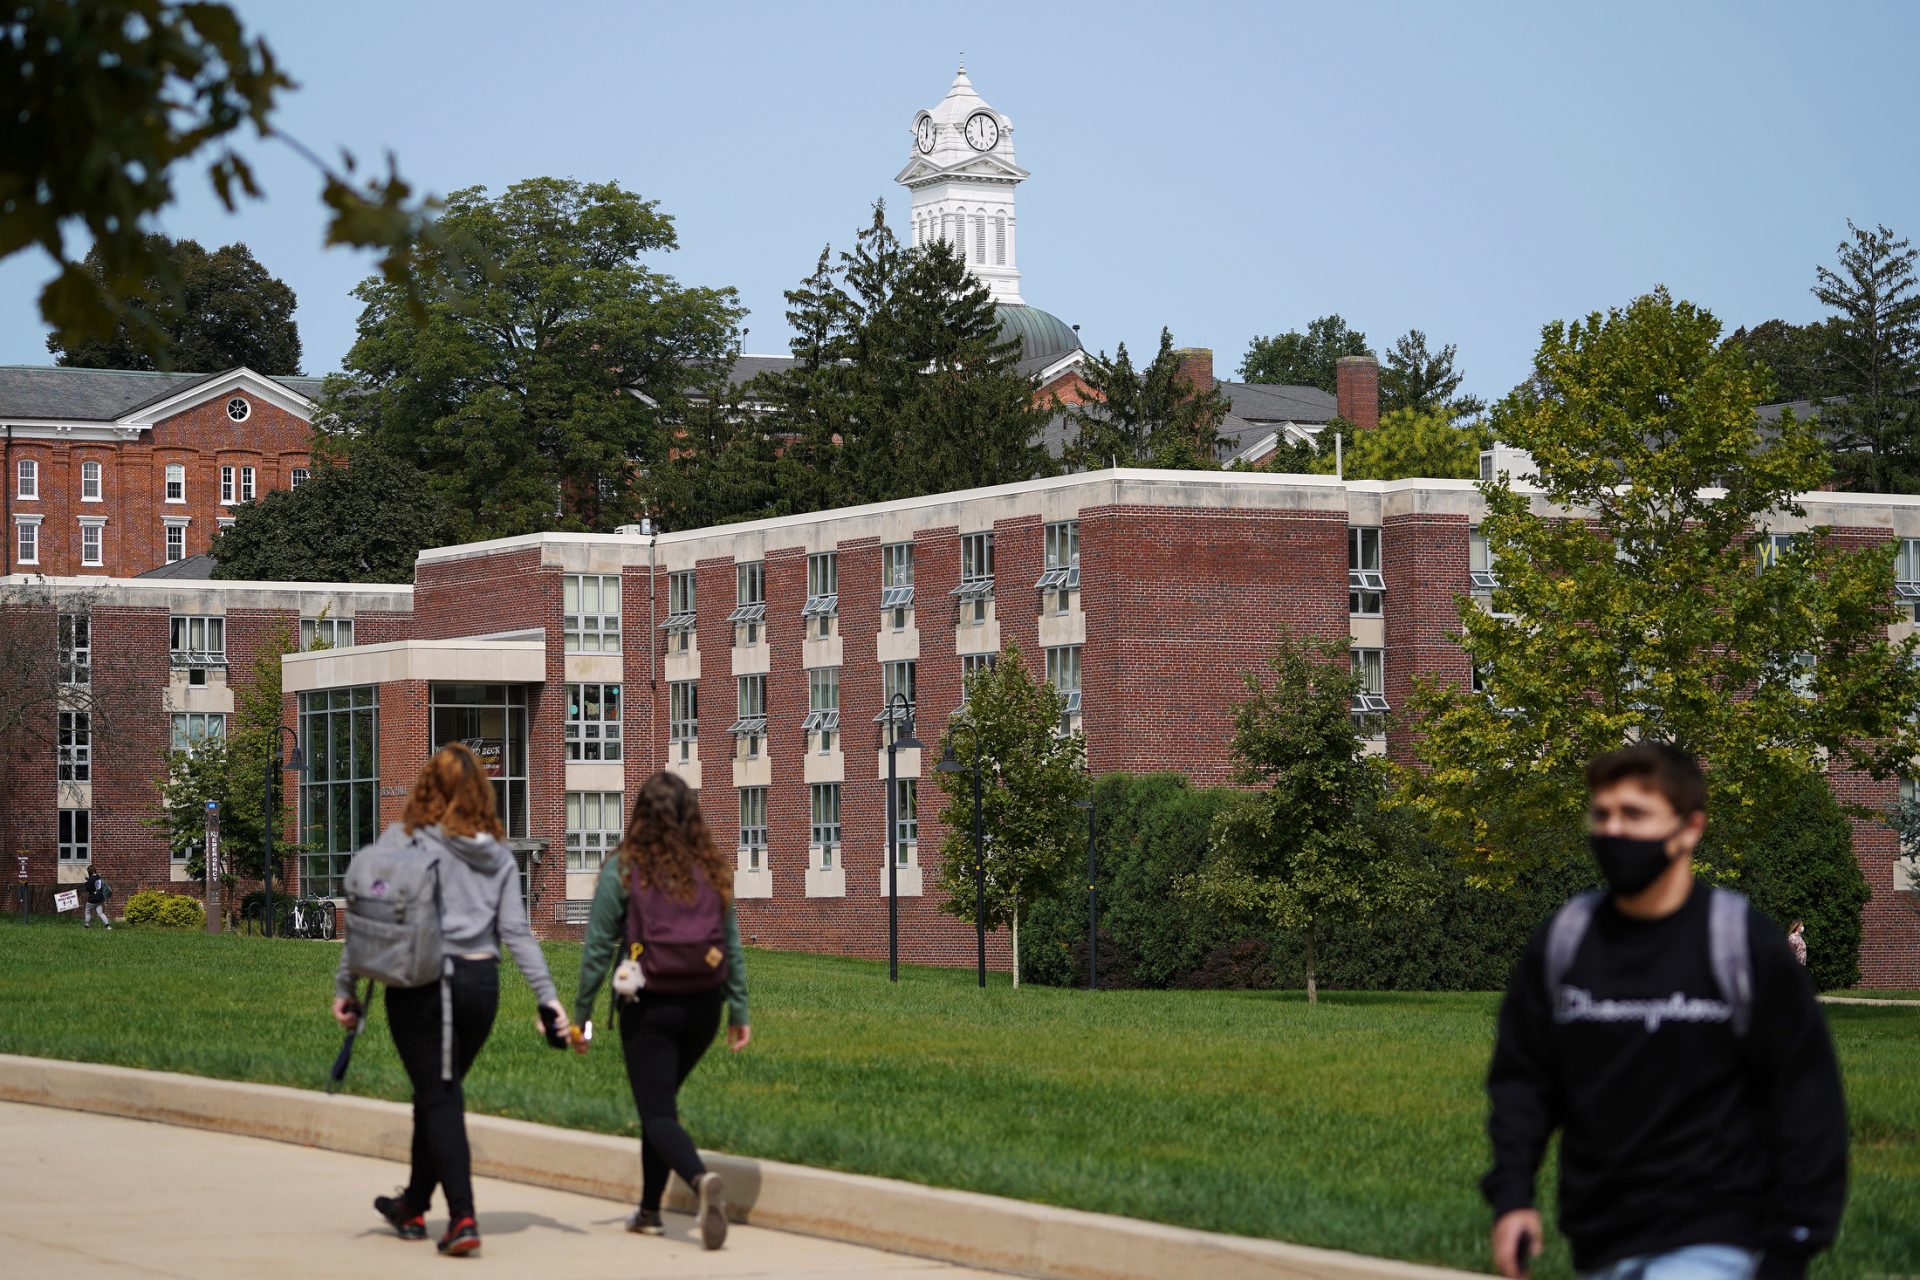 Kutztown University has been seeing a spike in COVID-19 cases among students on the campus in Kutztown, Pennsylvania.